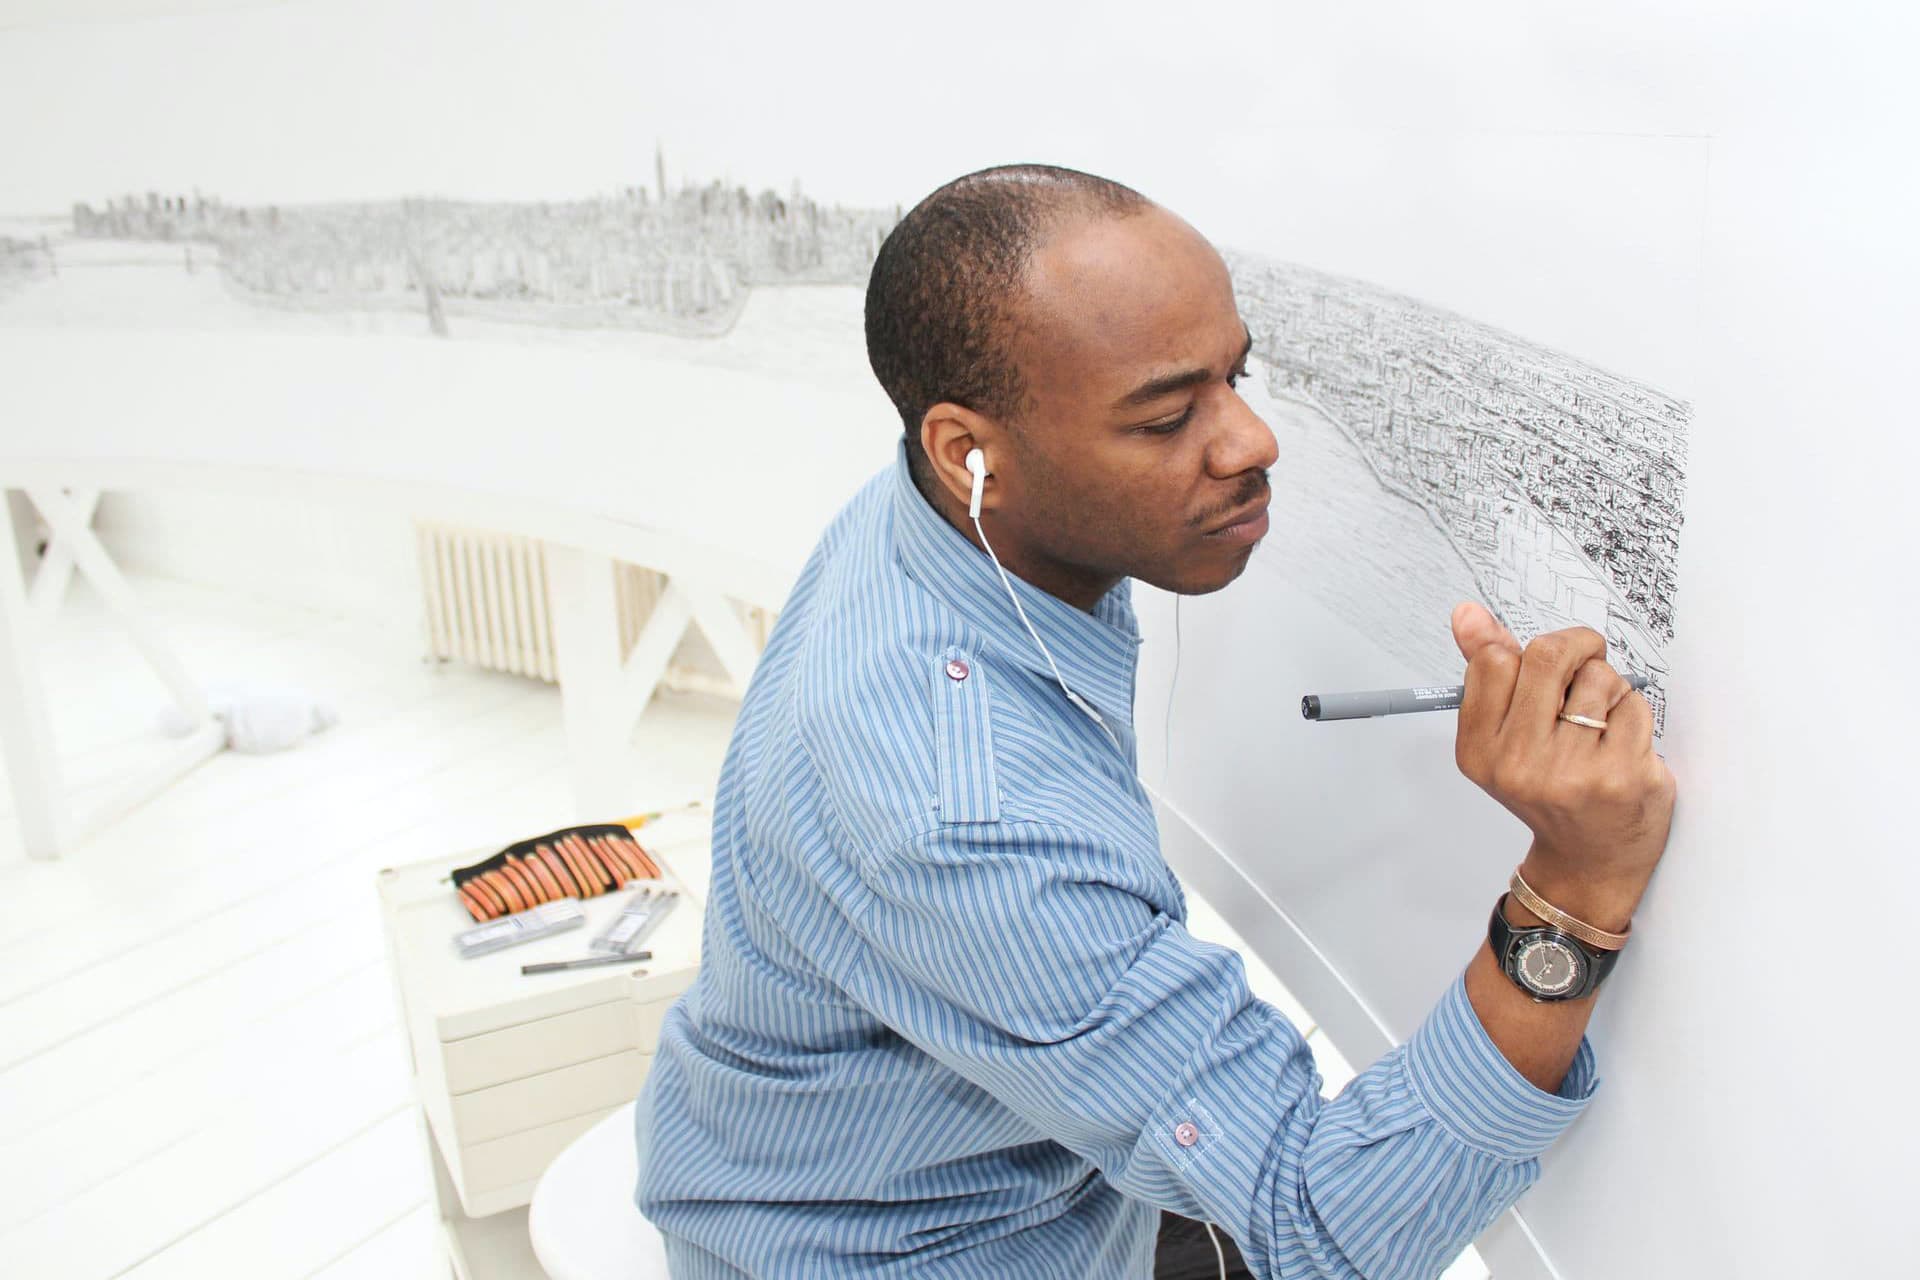 Stephen Wiltshire - Drawing New York